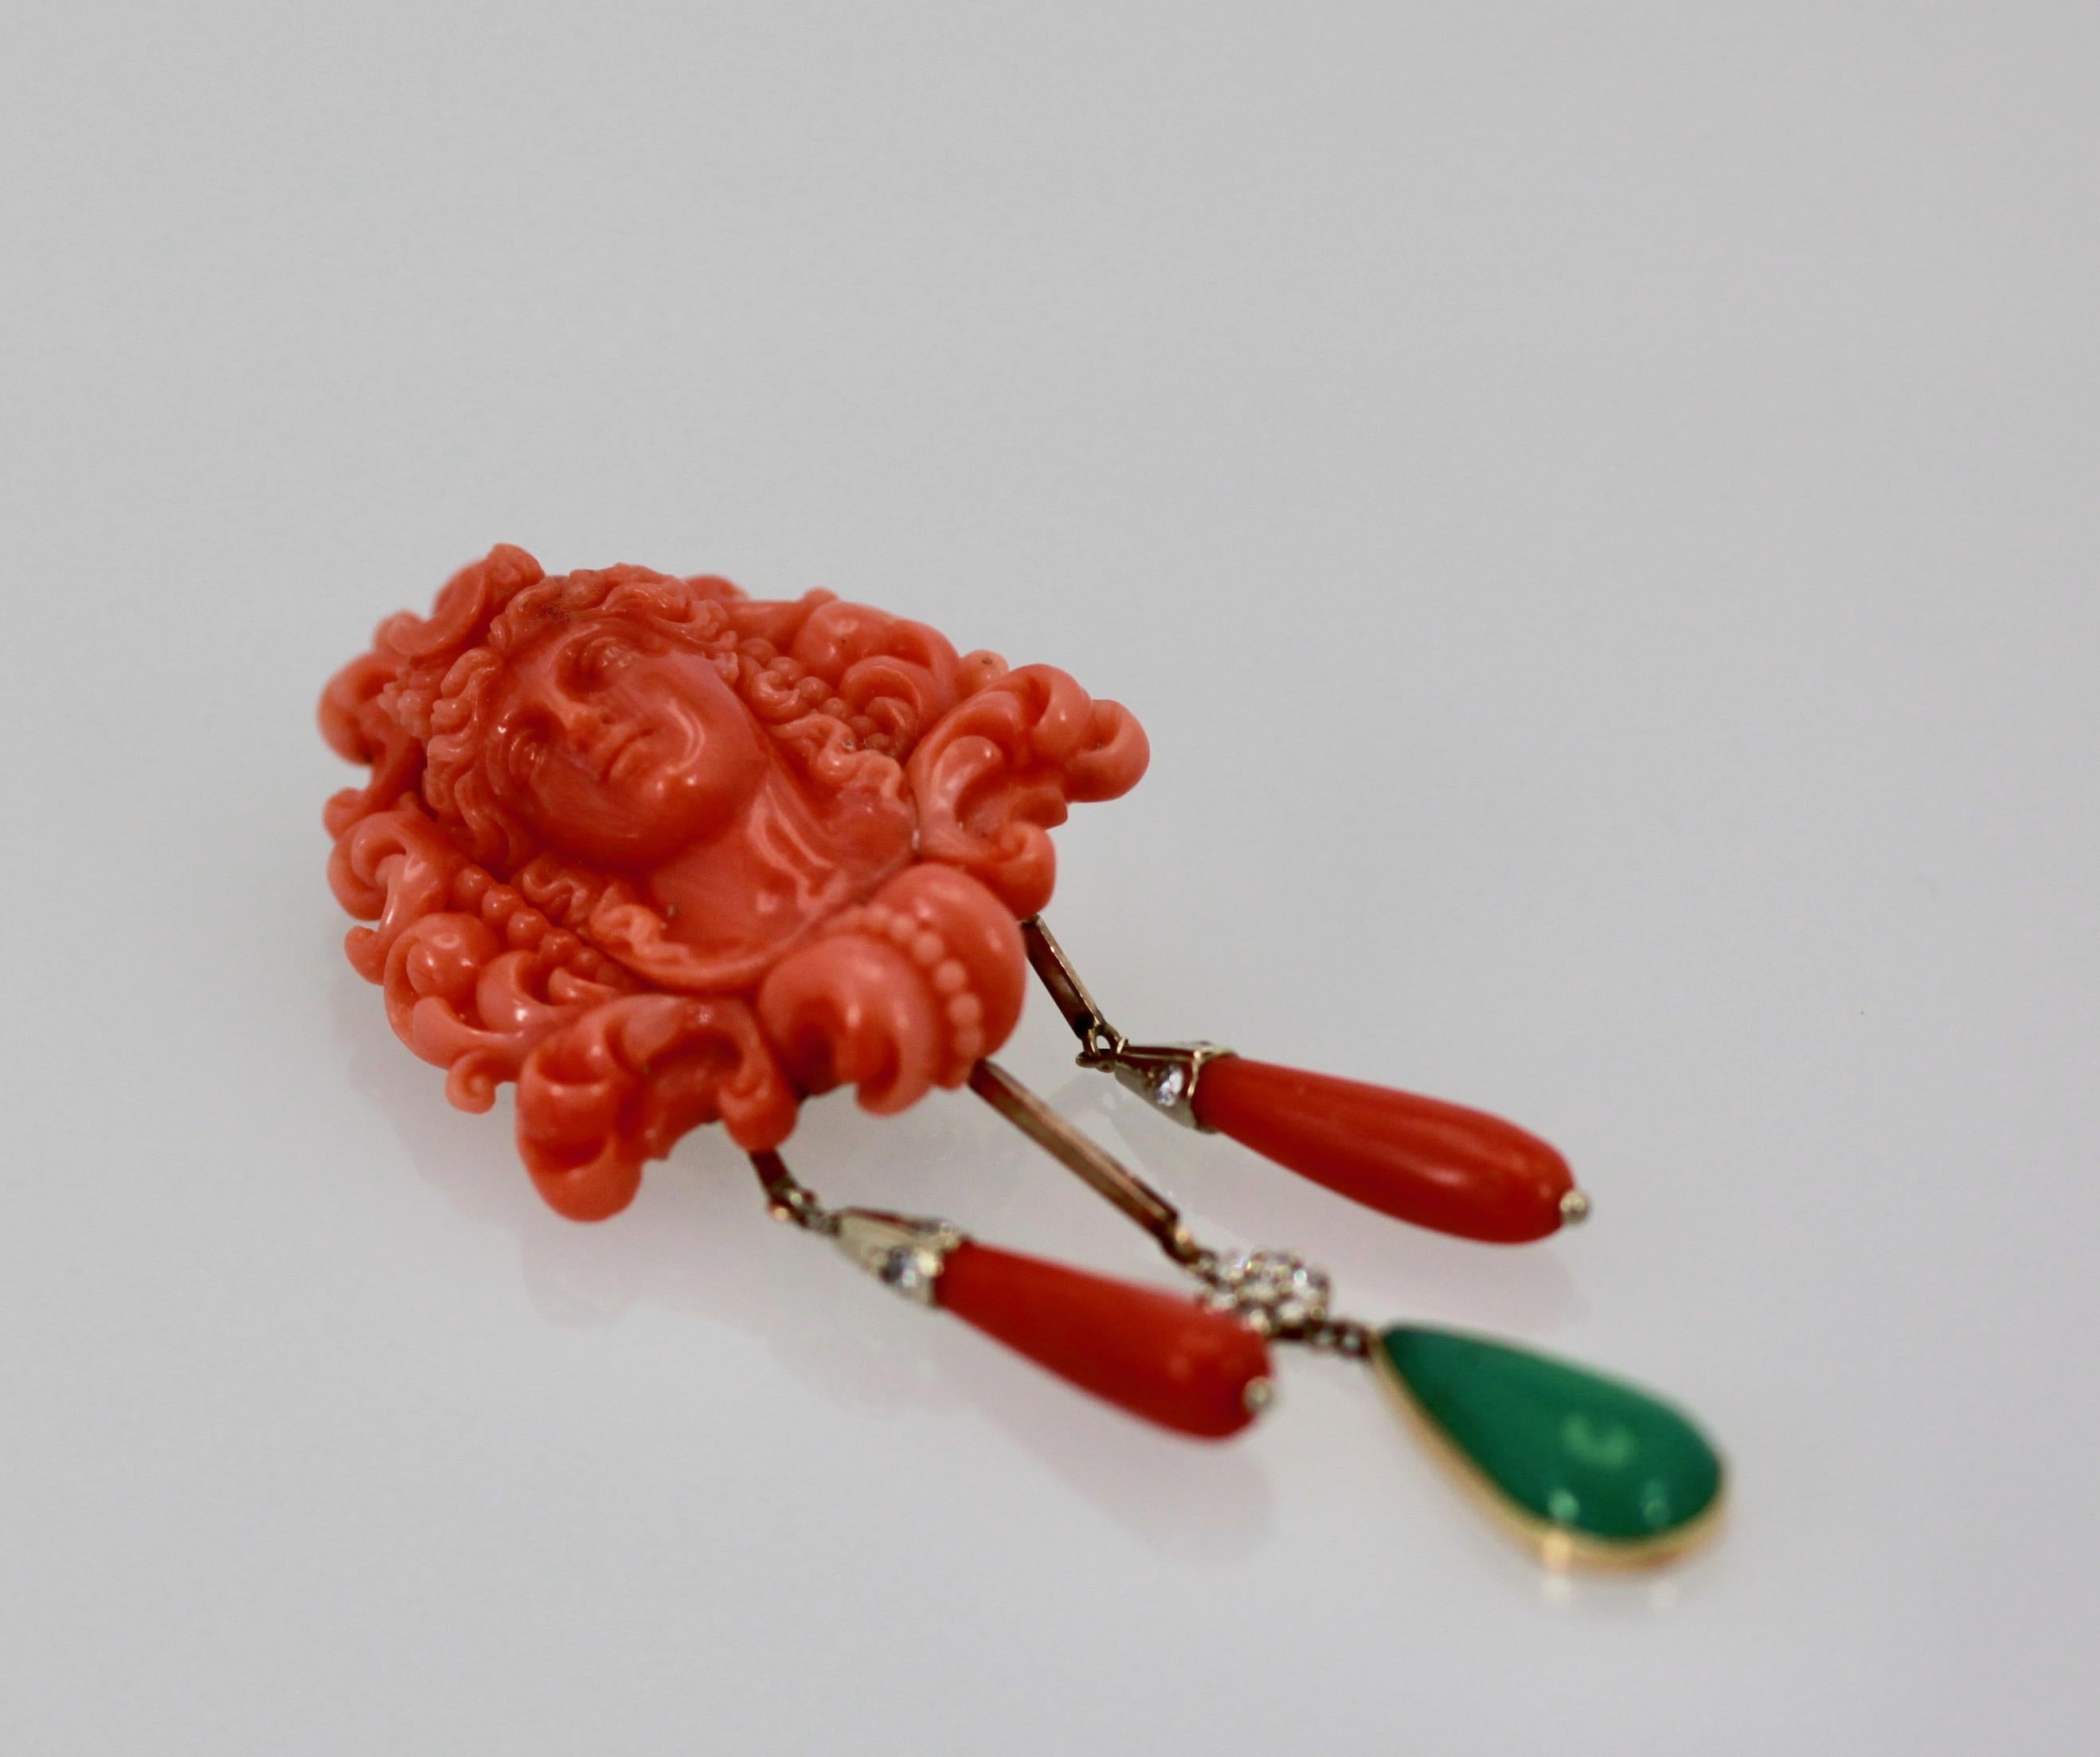 This lovely Cameo brooch is done in Mediterranean Coral with a lovely elaborate ladies face and headdress.  It is further decorated with two Coral drops and one Crystaphase drop. This piece is carved beautifully just look at her face and all the